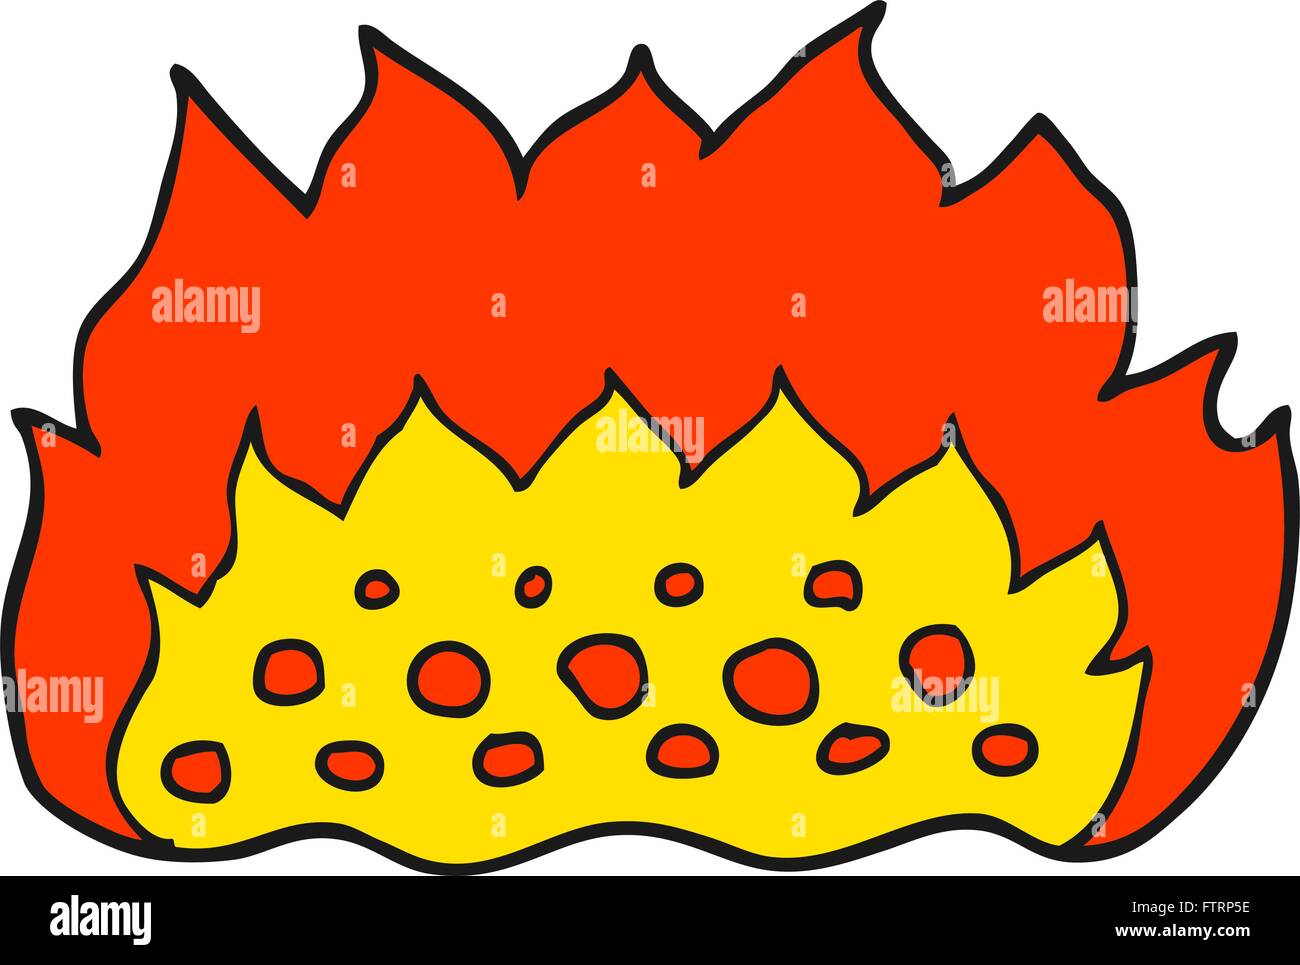 freehand drawn cartoon flames Stock Vector